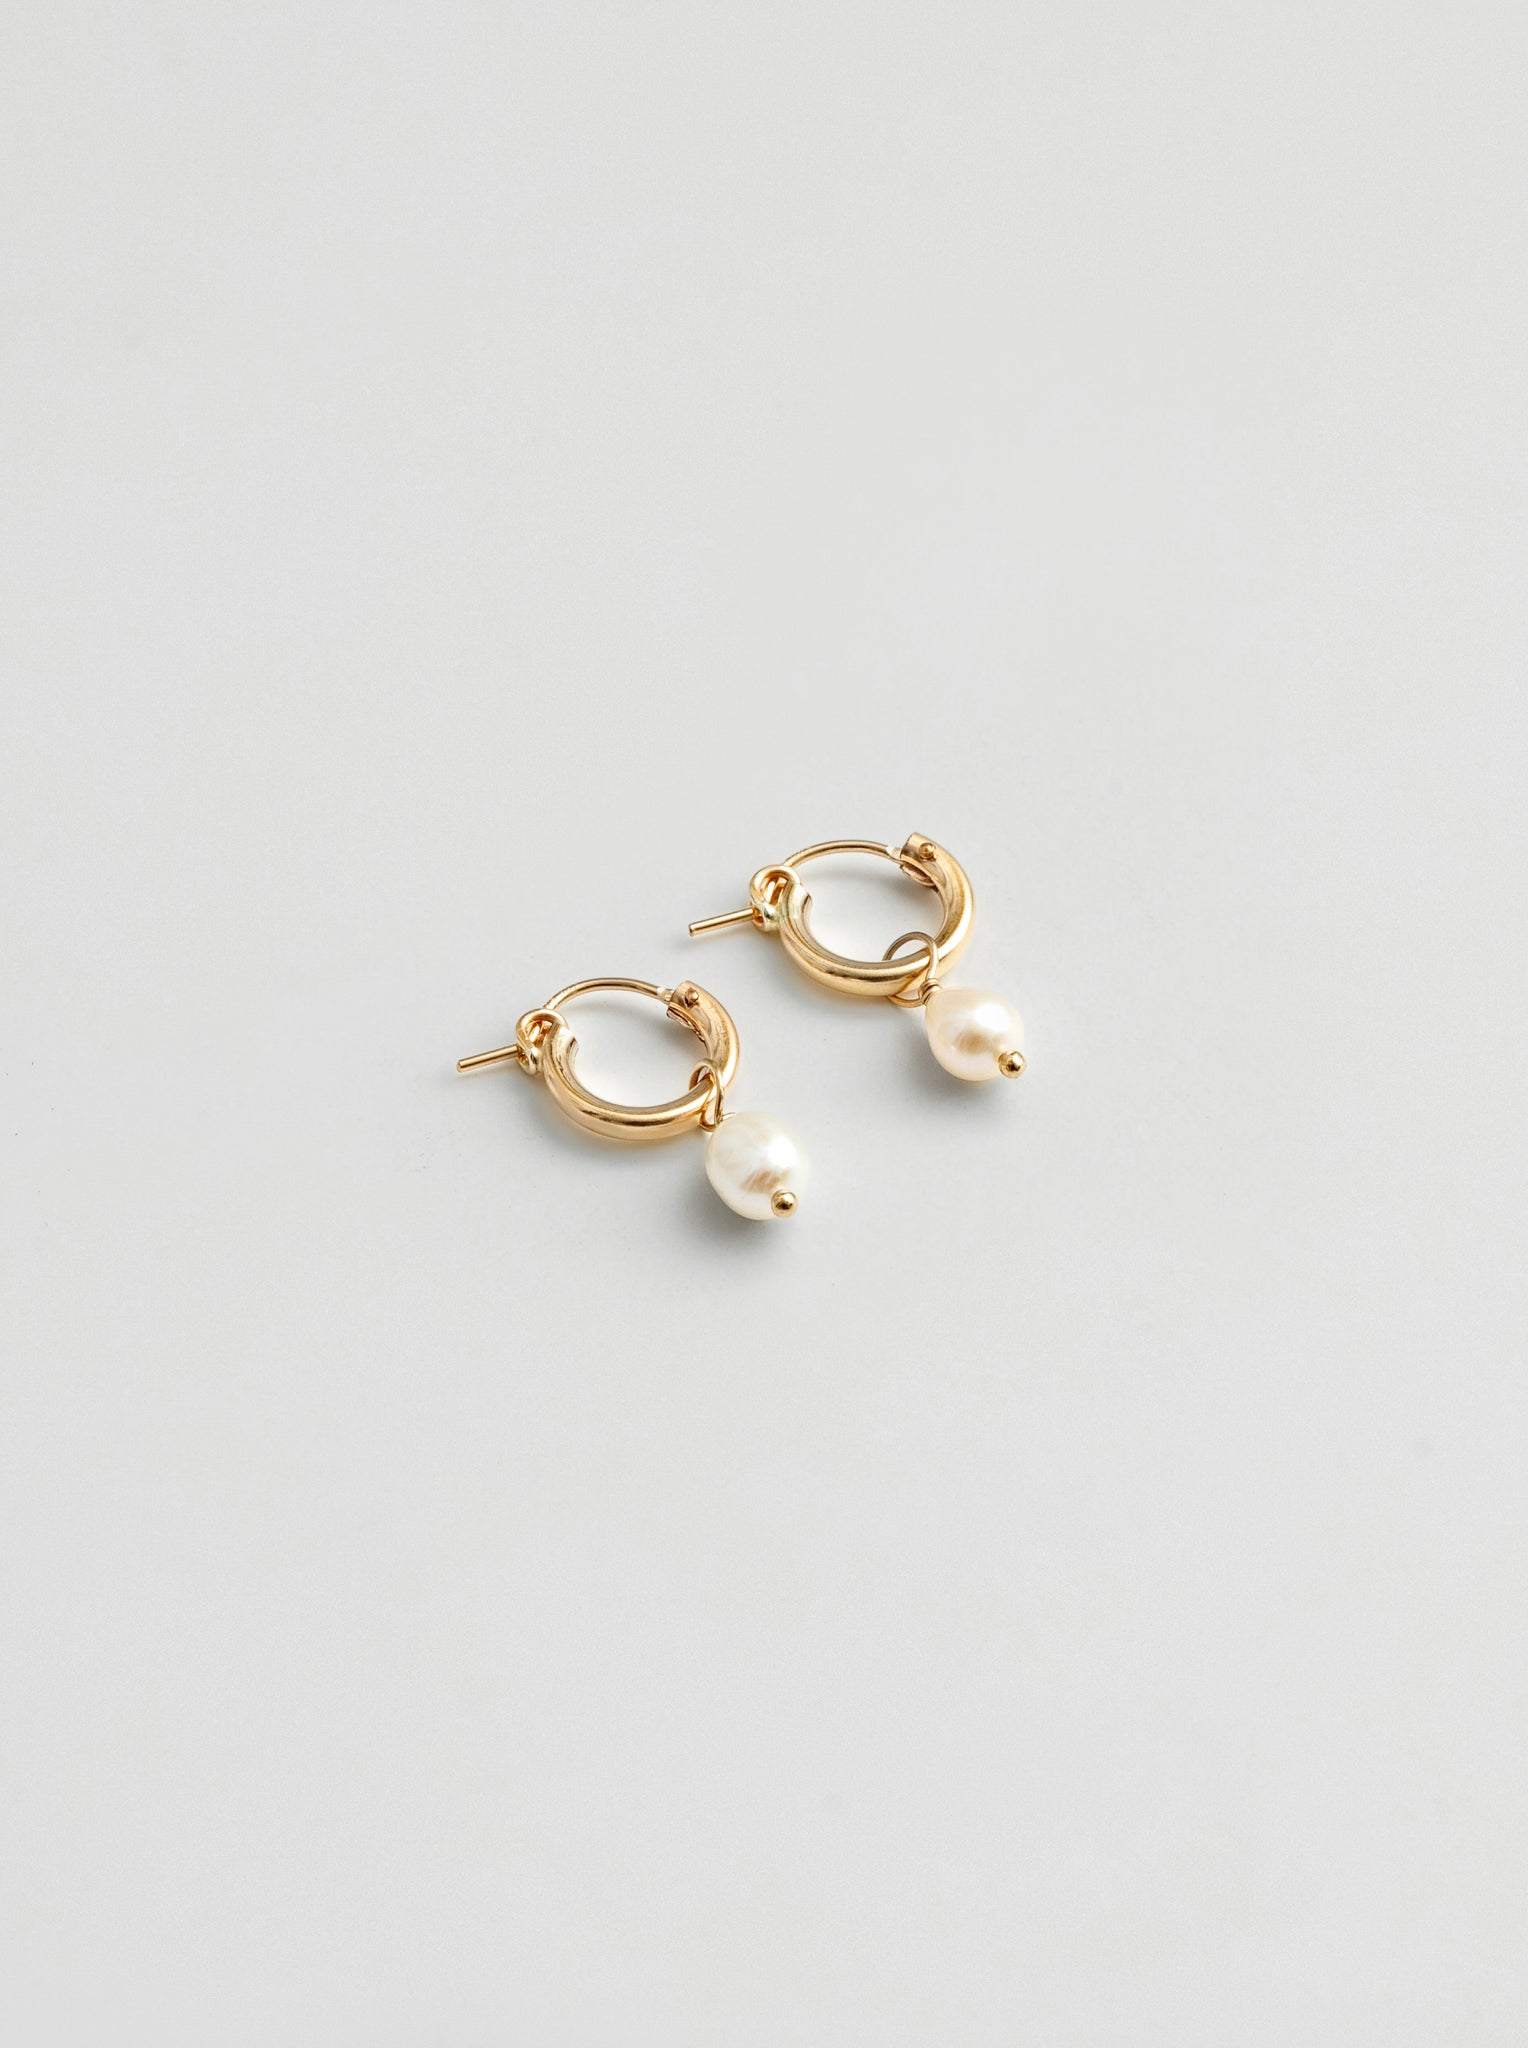 Wolf Circus Small Pearl Hoop Earrings in 14k Gold | Removable Pearl-Earrings-wolfcircus.com